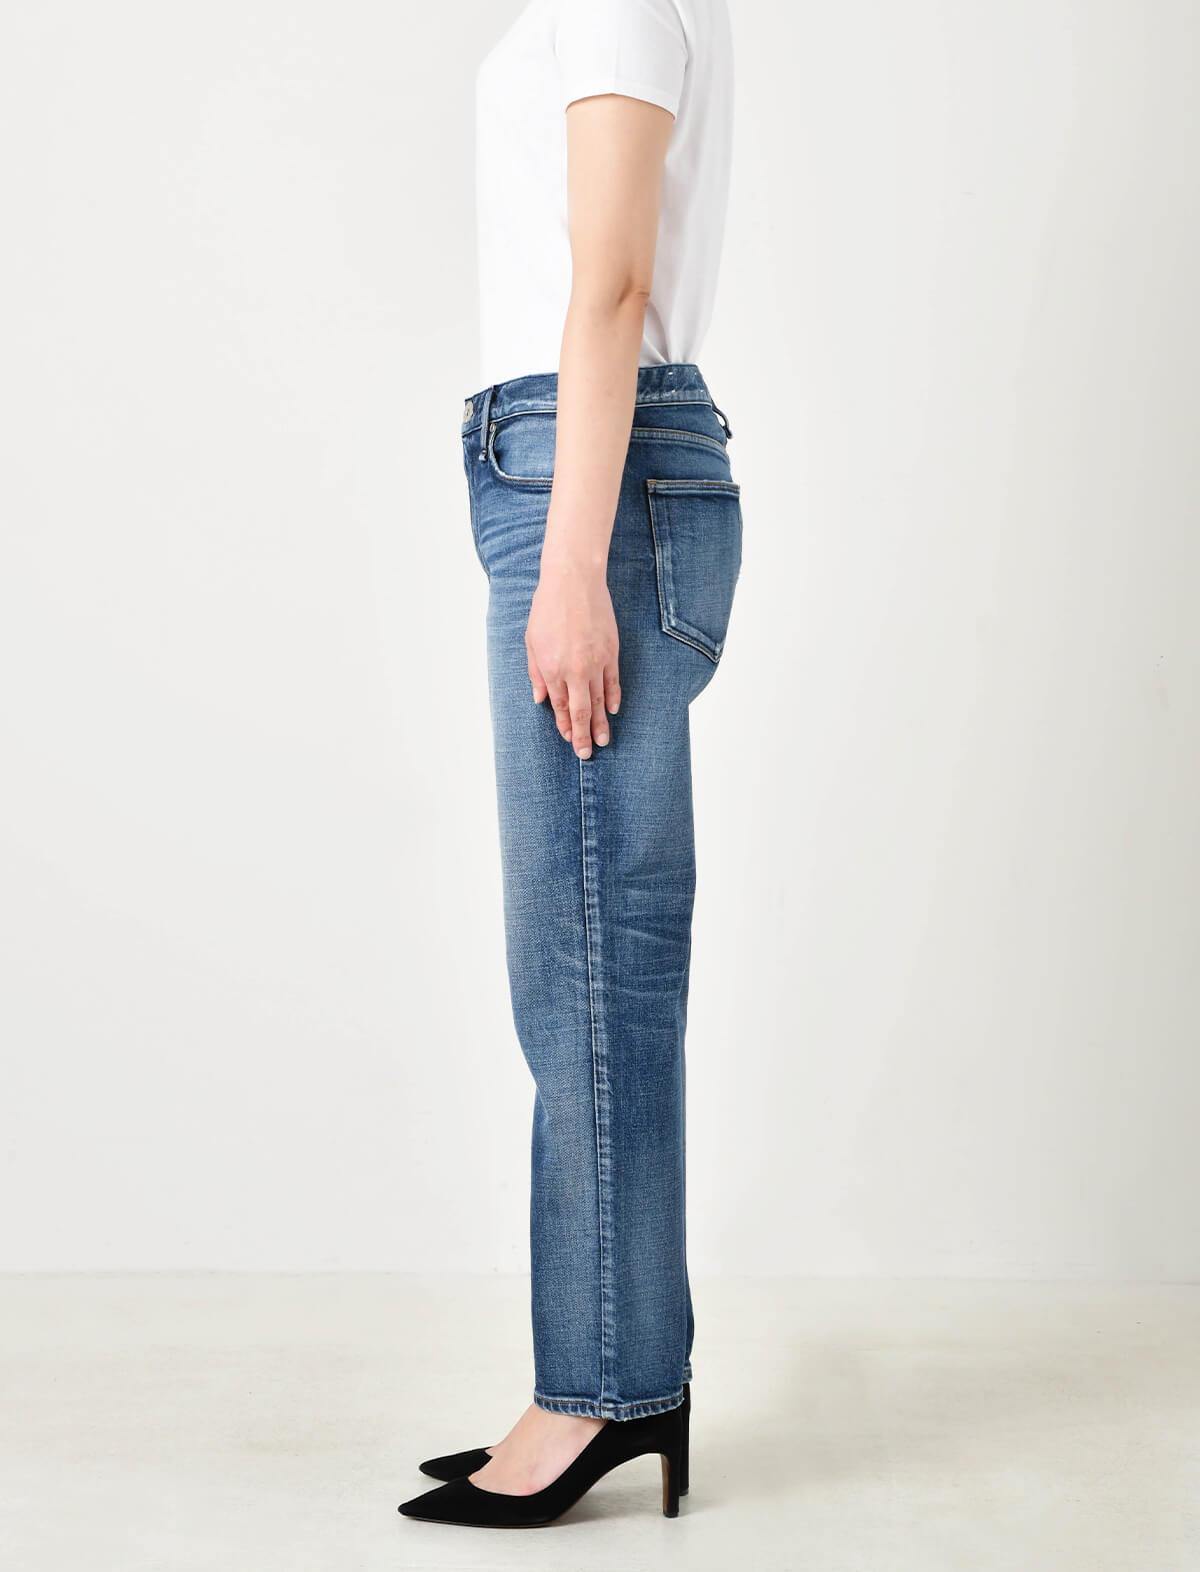 UPPER HIGHTS The Girl Midrise Relaxed Tapered Jeans in Moon | CLOSET Singapore